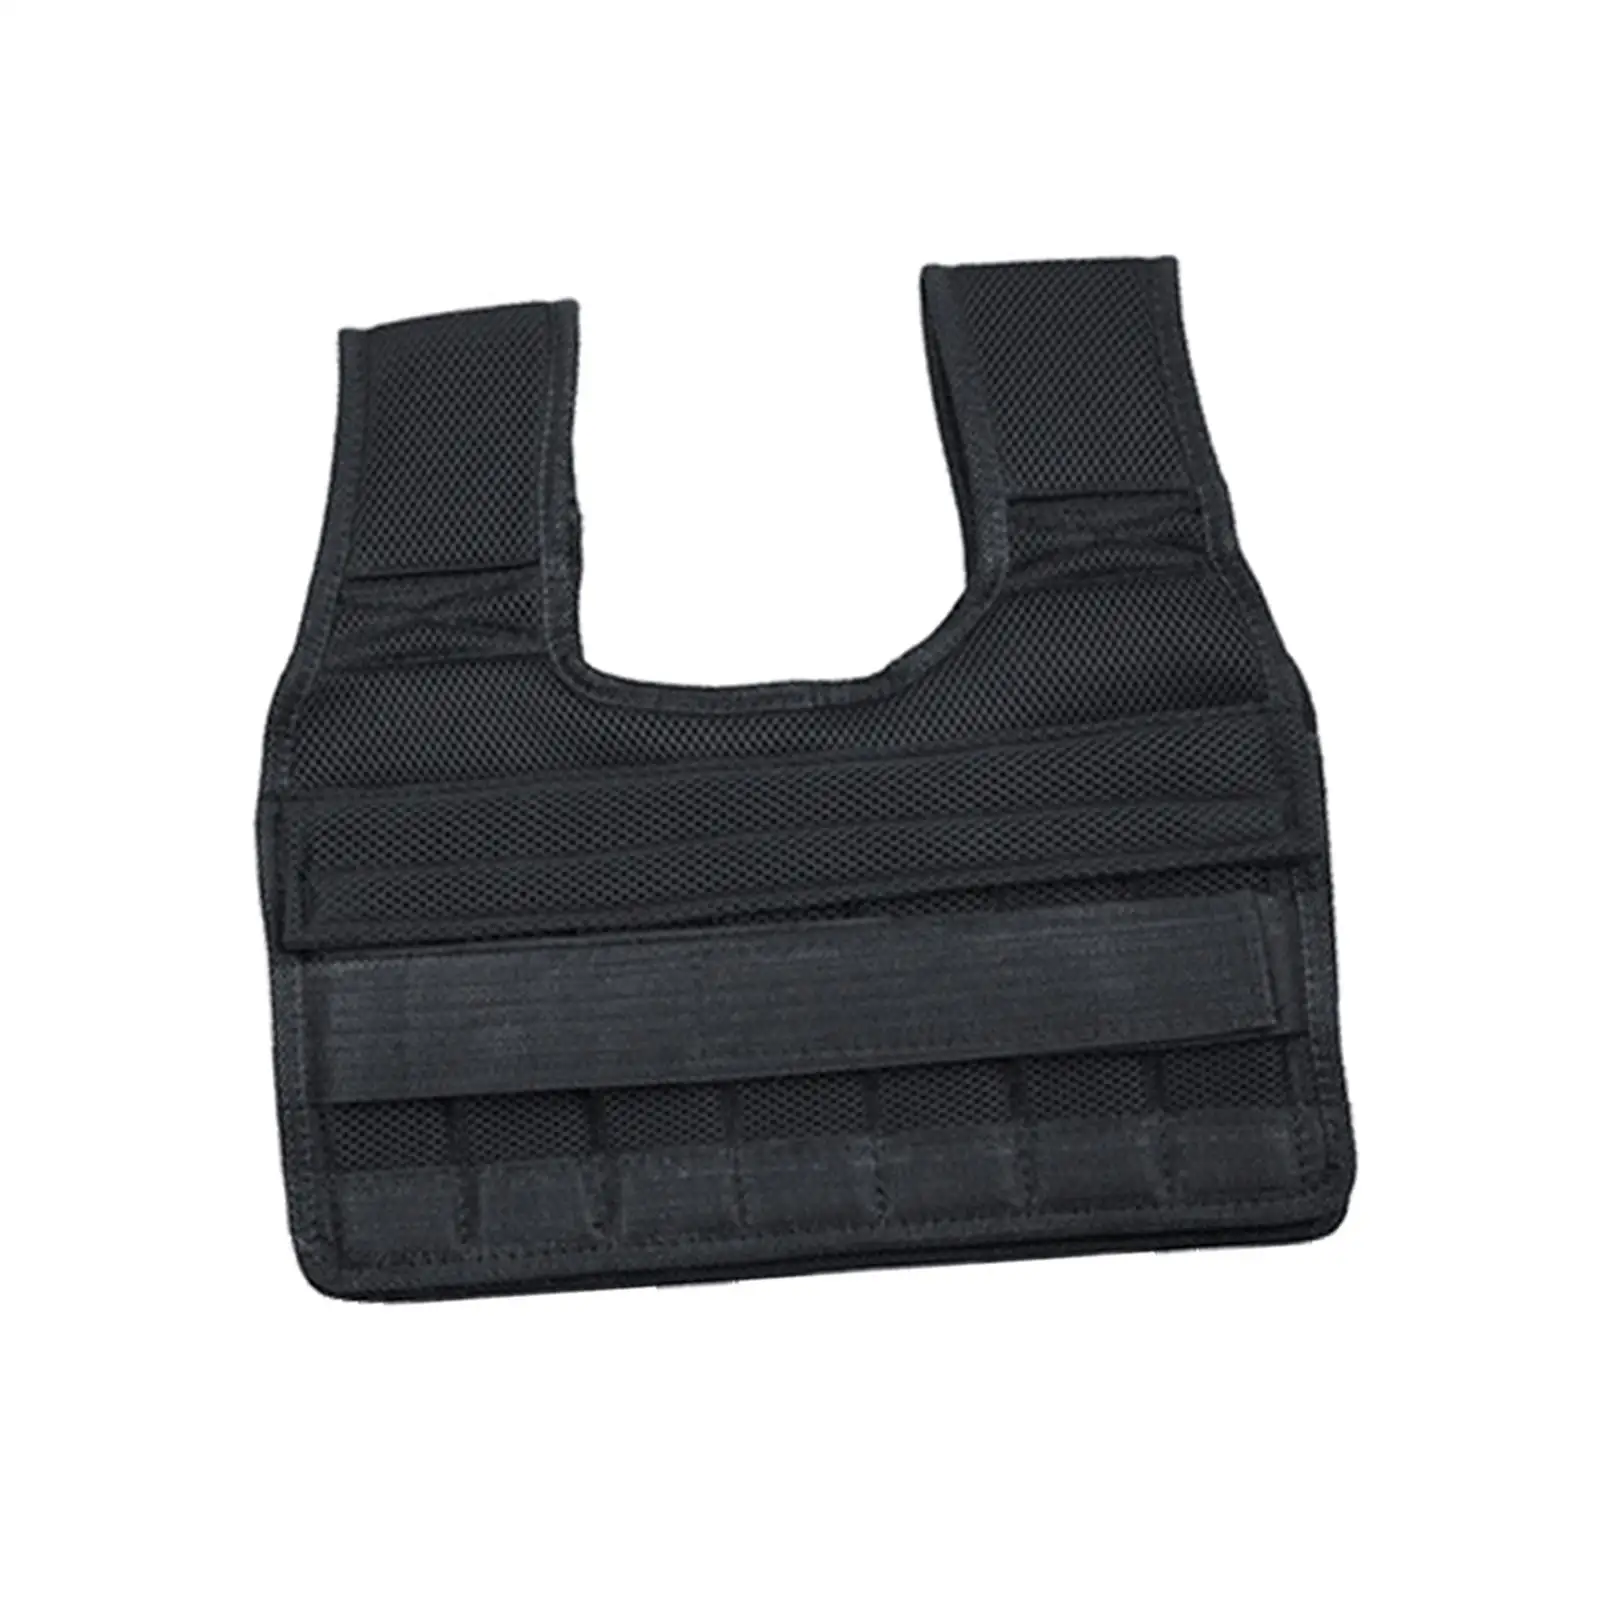 Vest Weightloading Empty Max Loading 3kg Exercise Heavy Duty Workout Gym 3kg